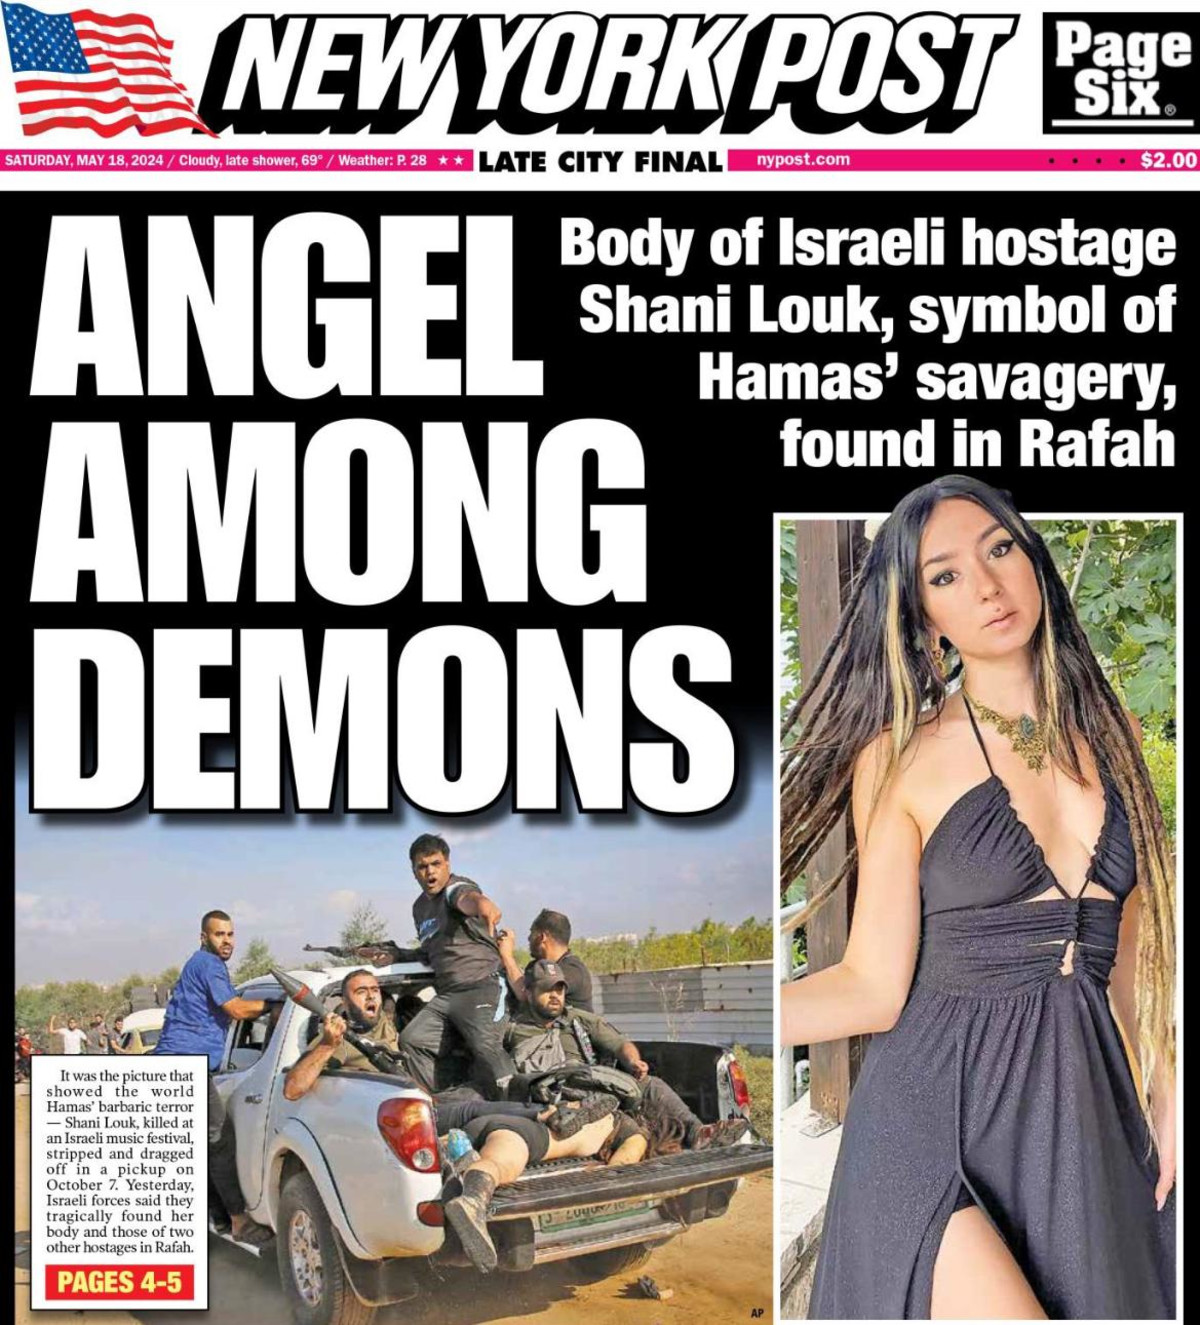 Shani Louk’s body found in Gaza, reported by “New York Post”